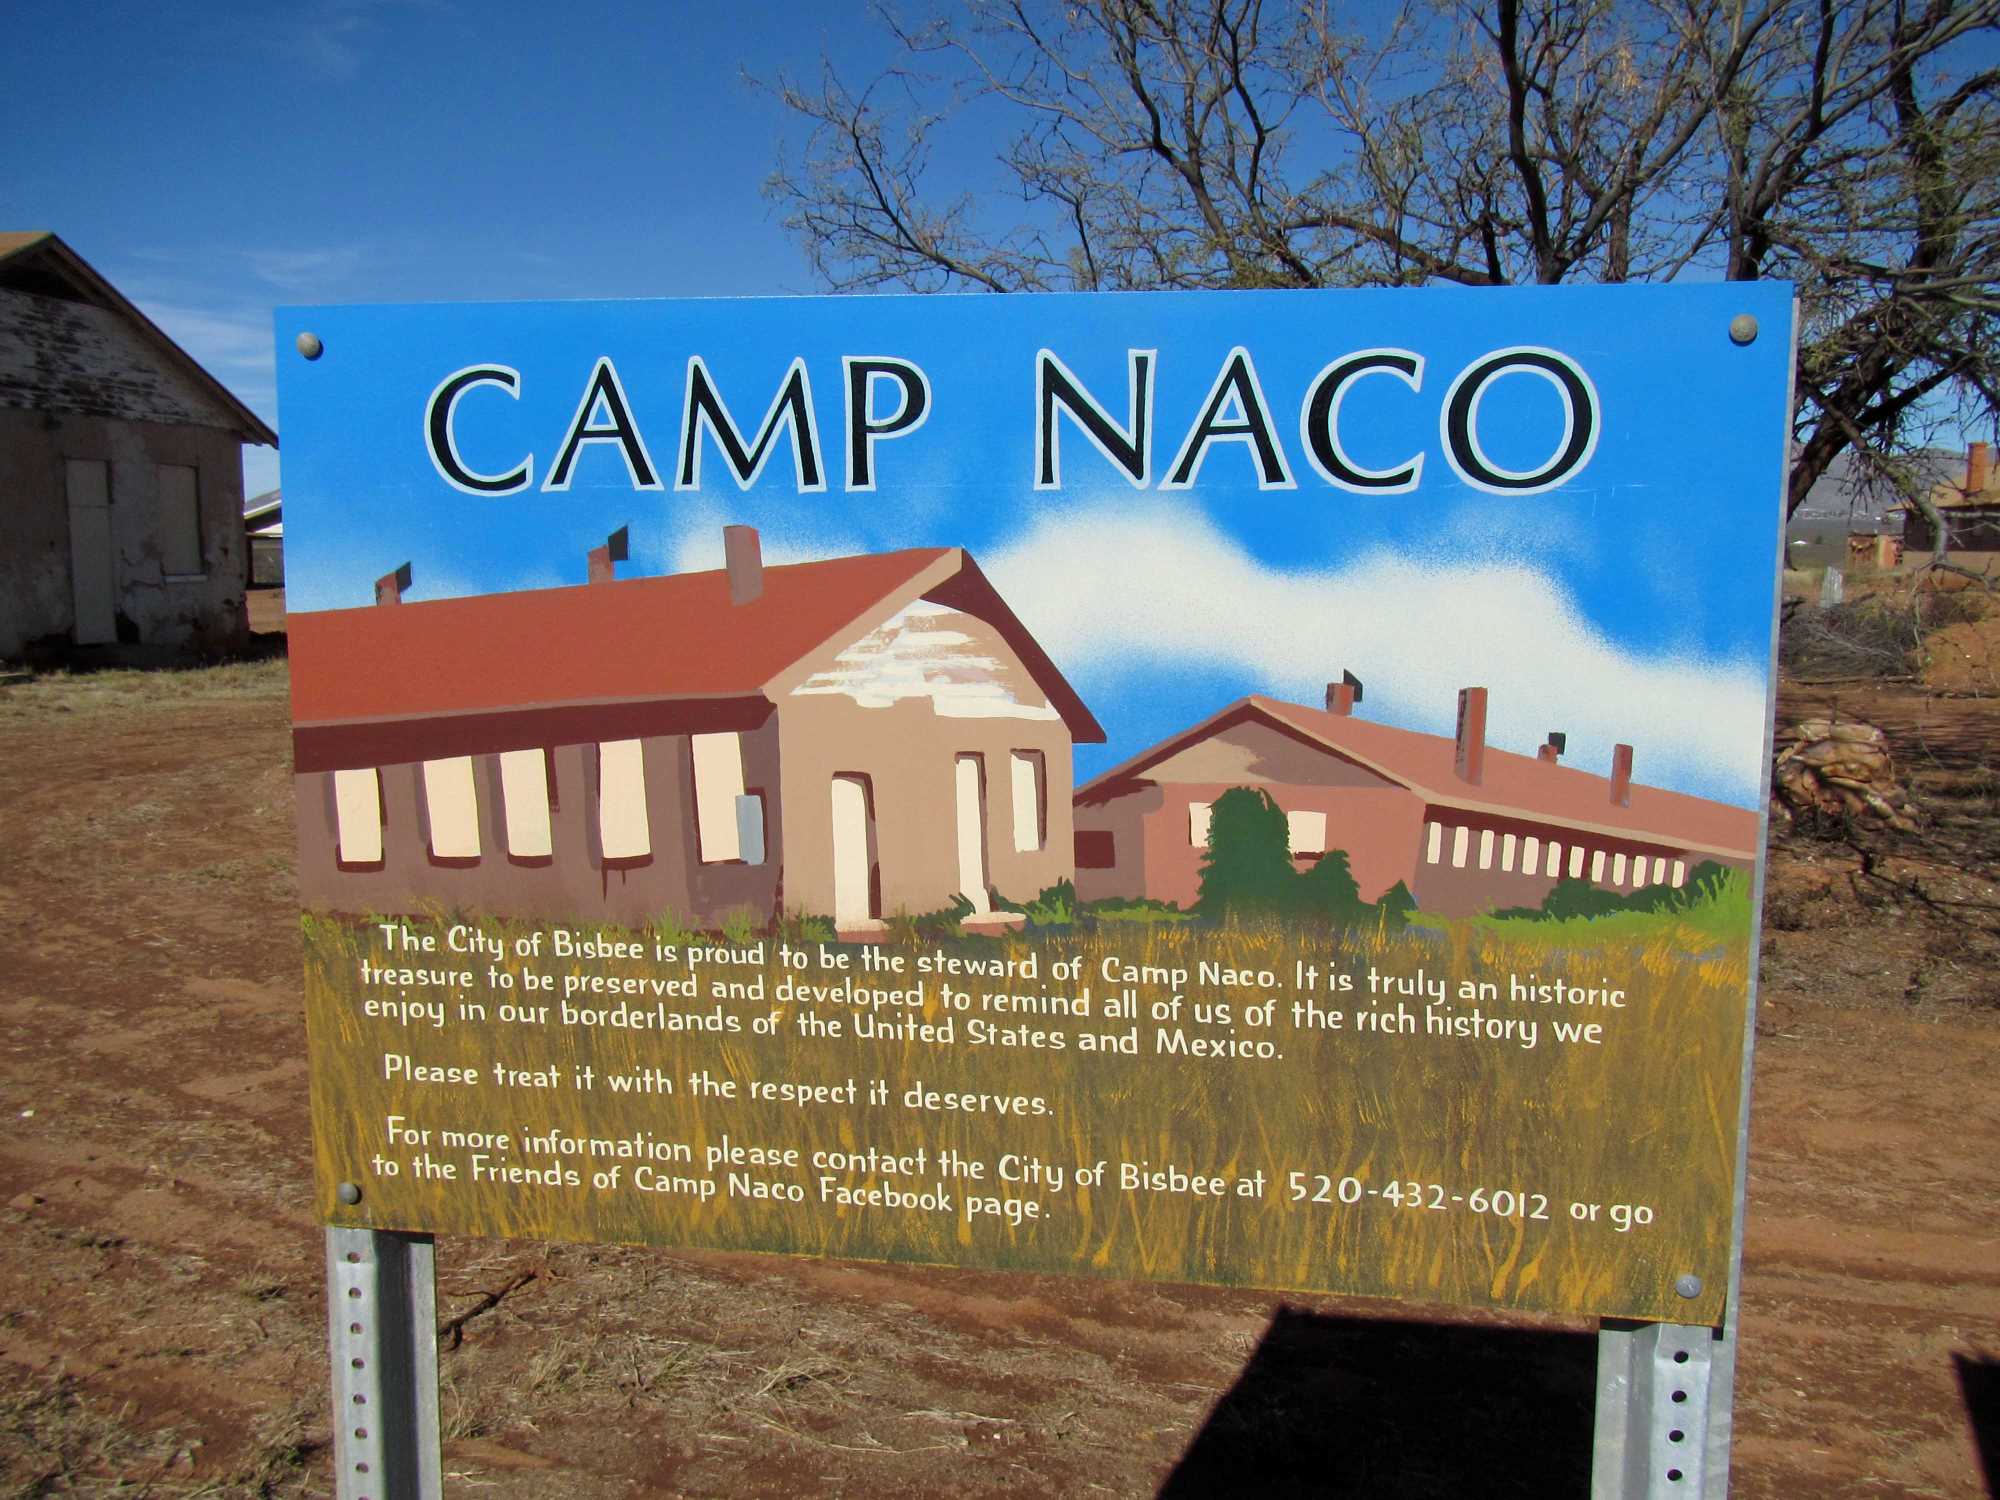 Welcome to Camp Naco! Image courtesy of the Friends of Camp Naco Facebook page